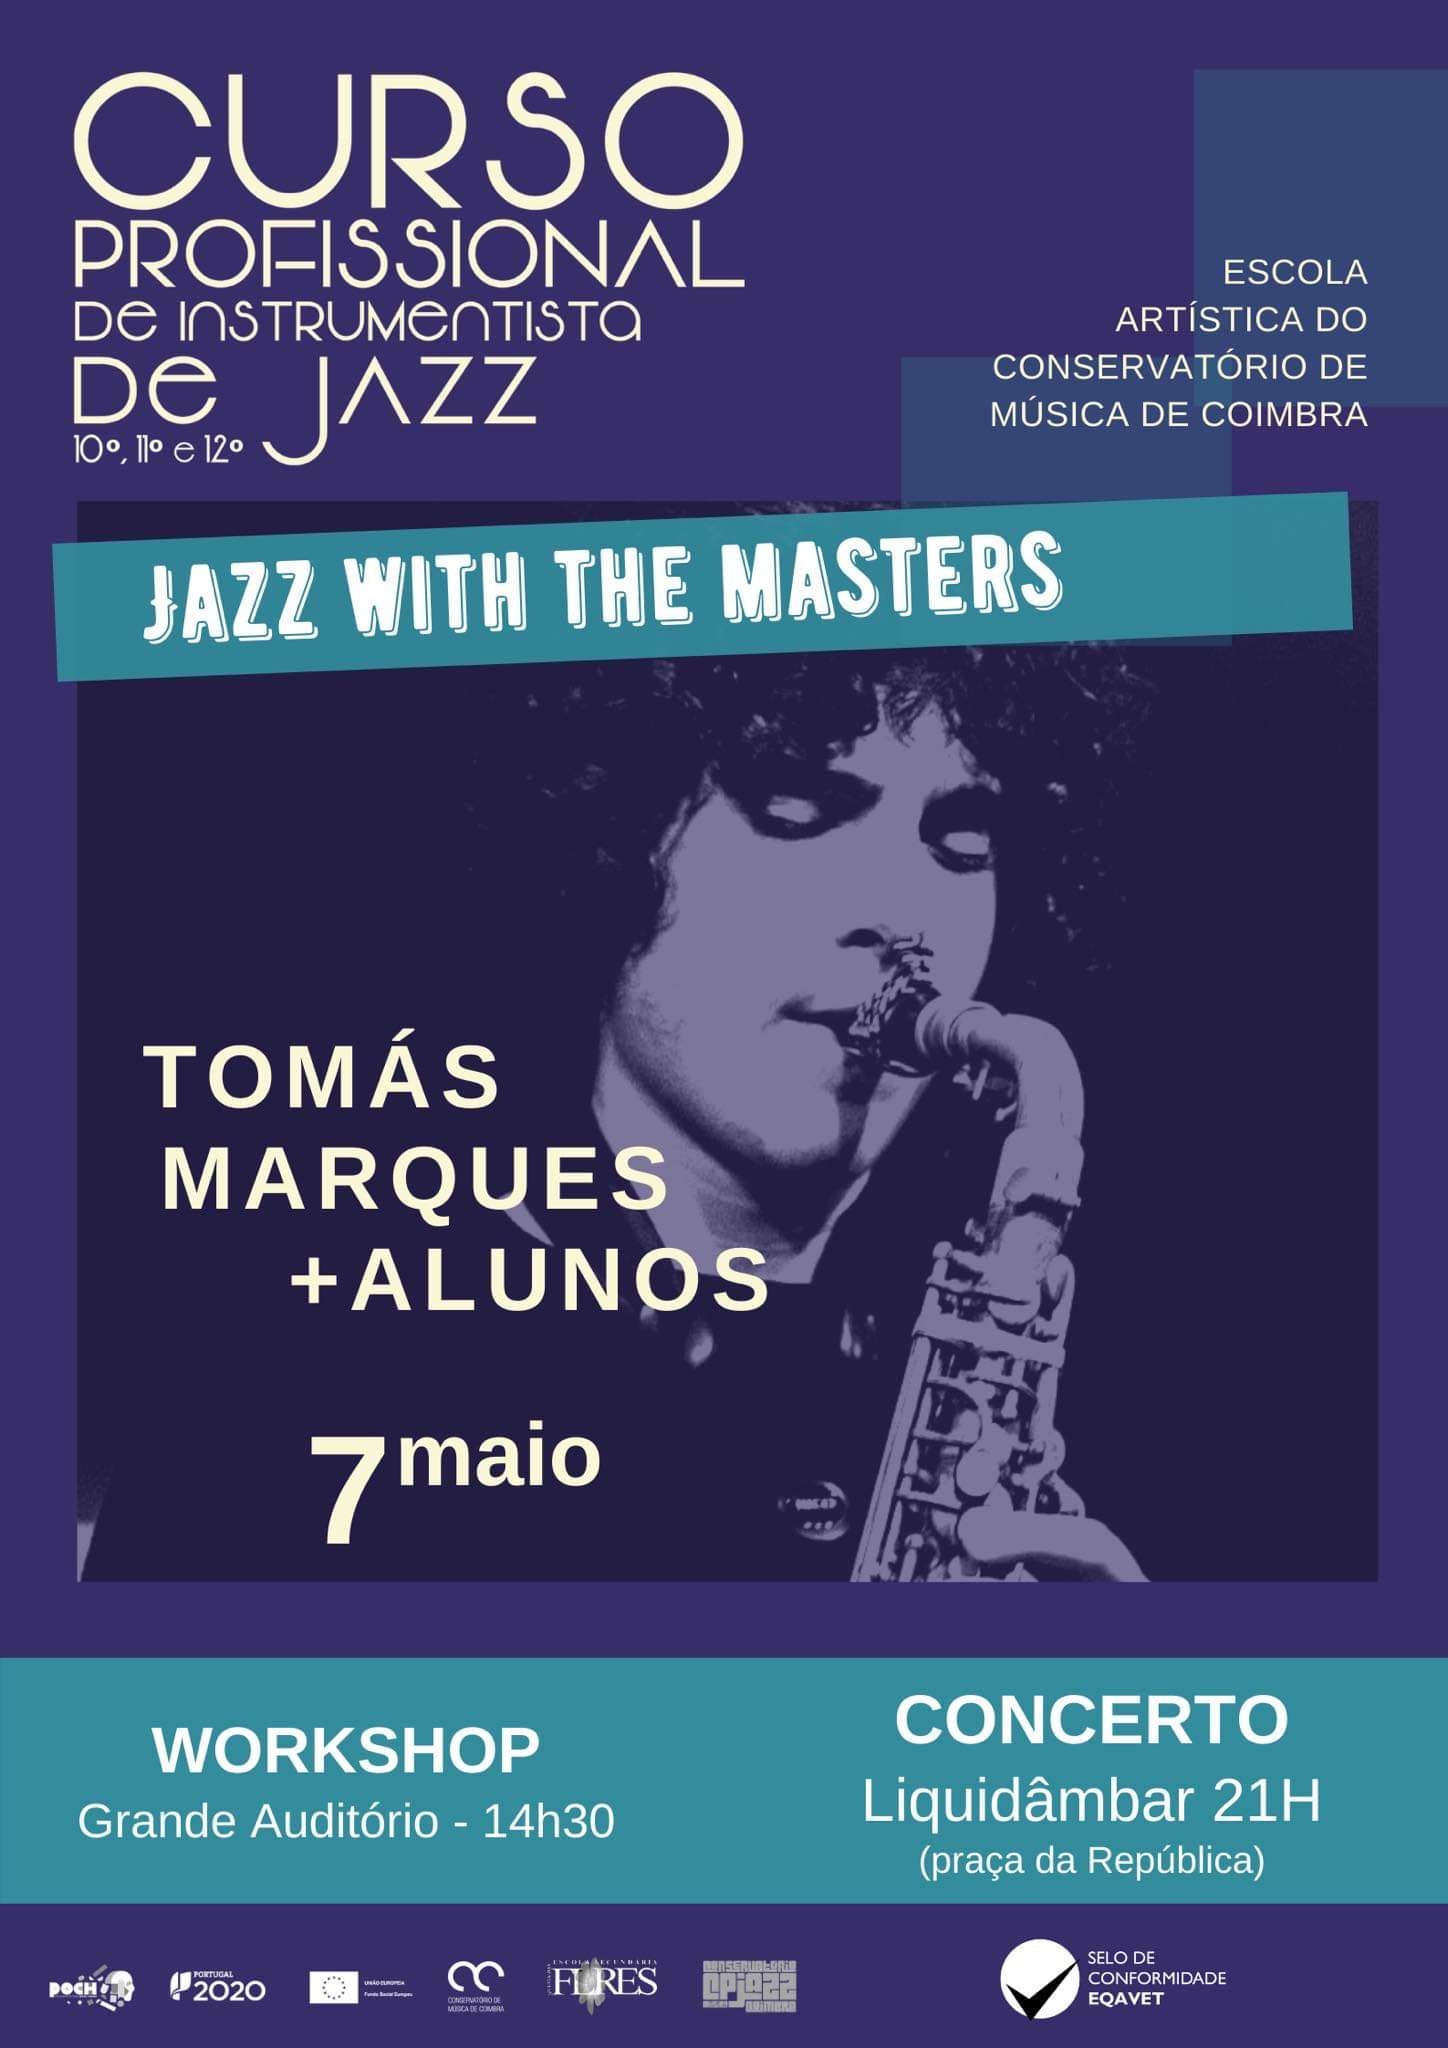 Jazz session with the masters - Tomás Marques